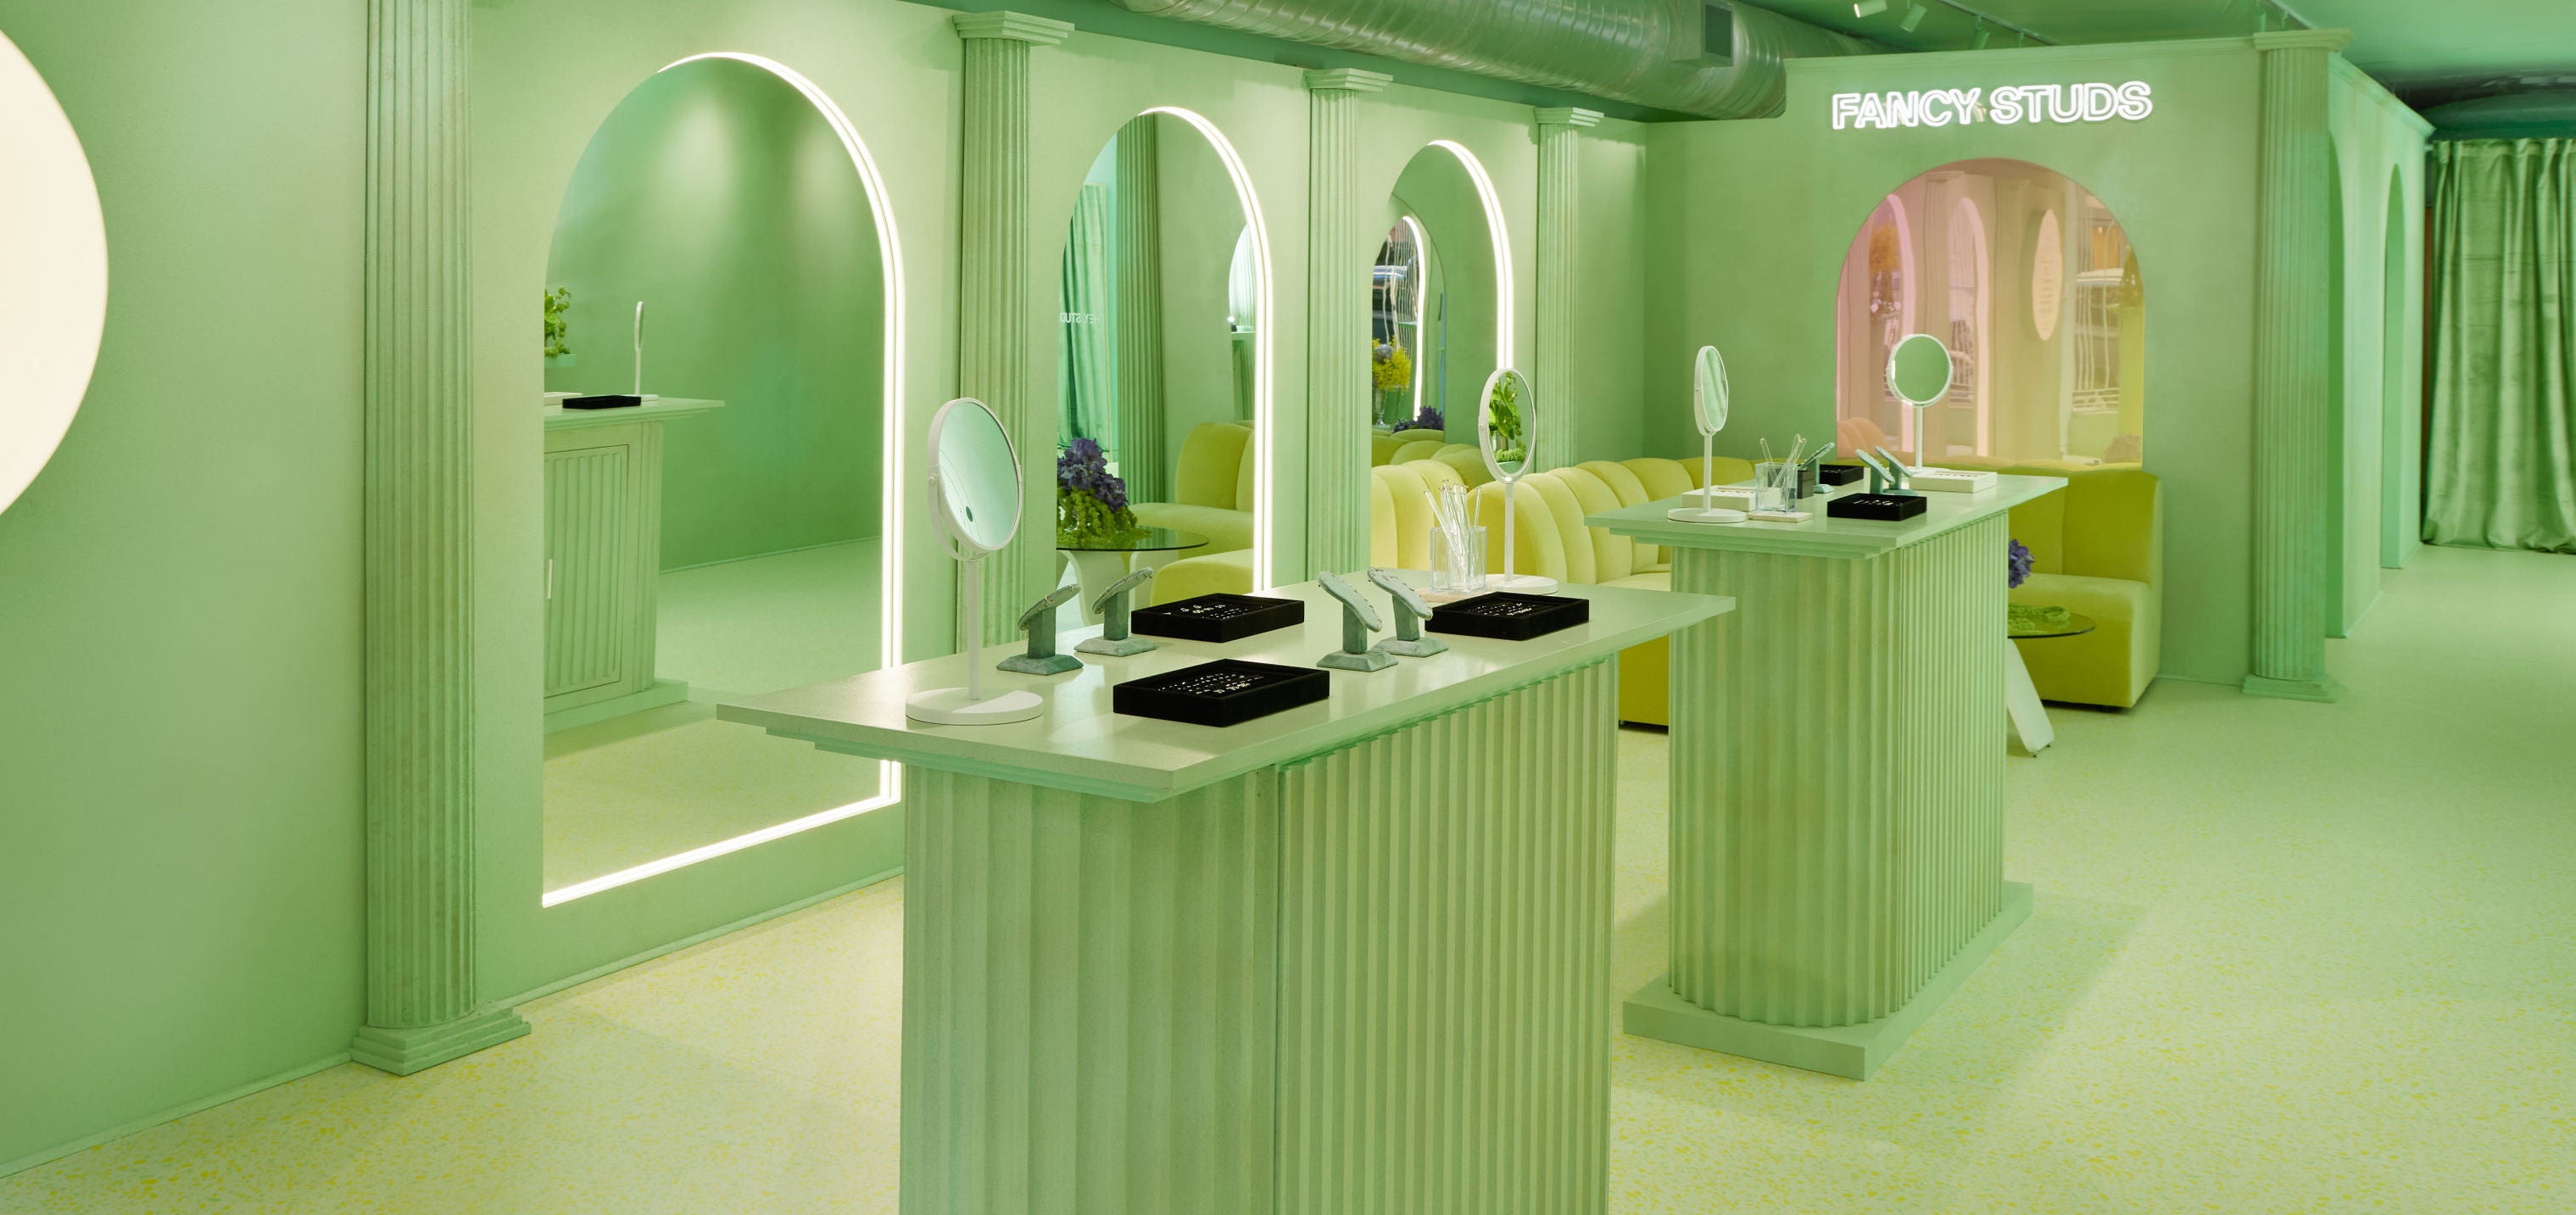 Interior of a stylish green-toned piercing studio with product display counters and decorative arches.